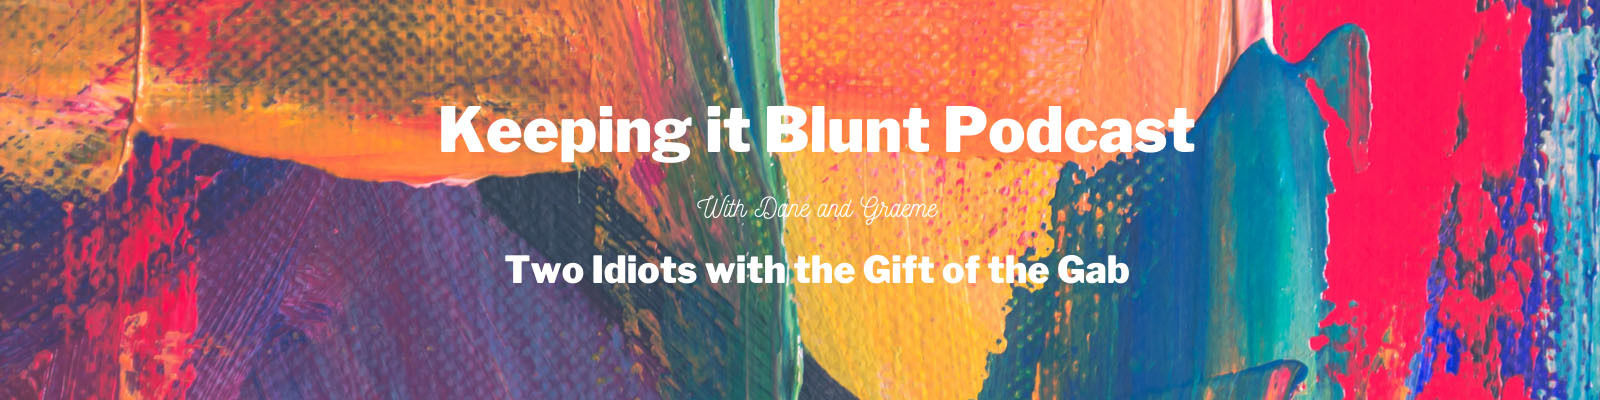 The Keeping it Blunt Podcast